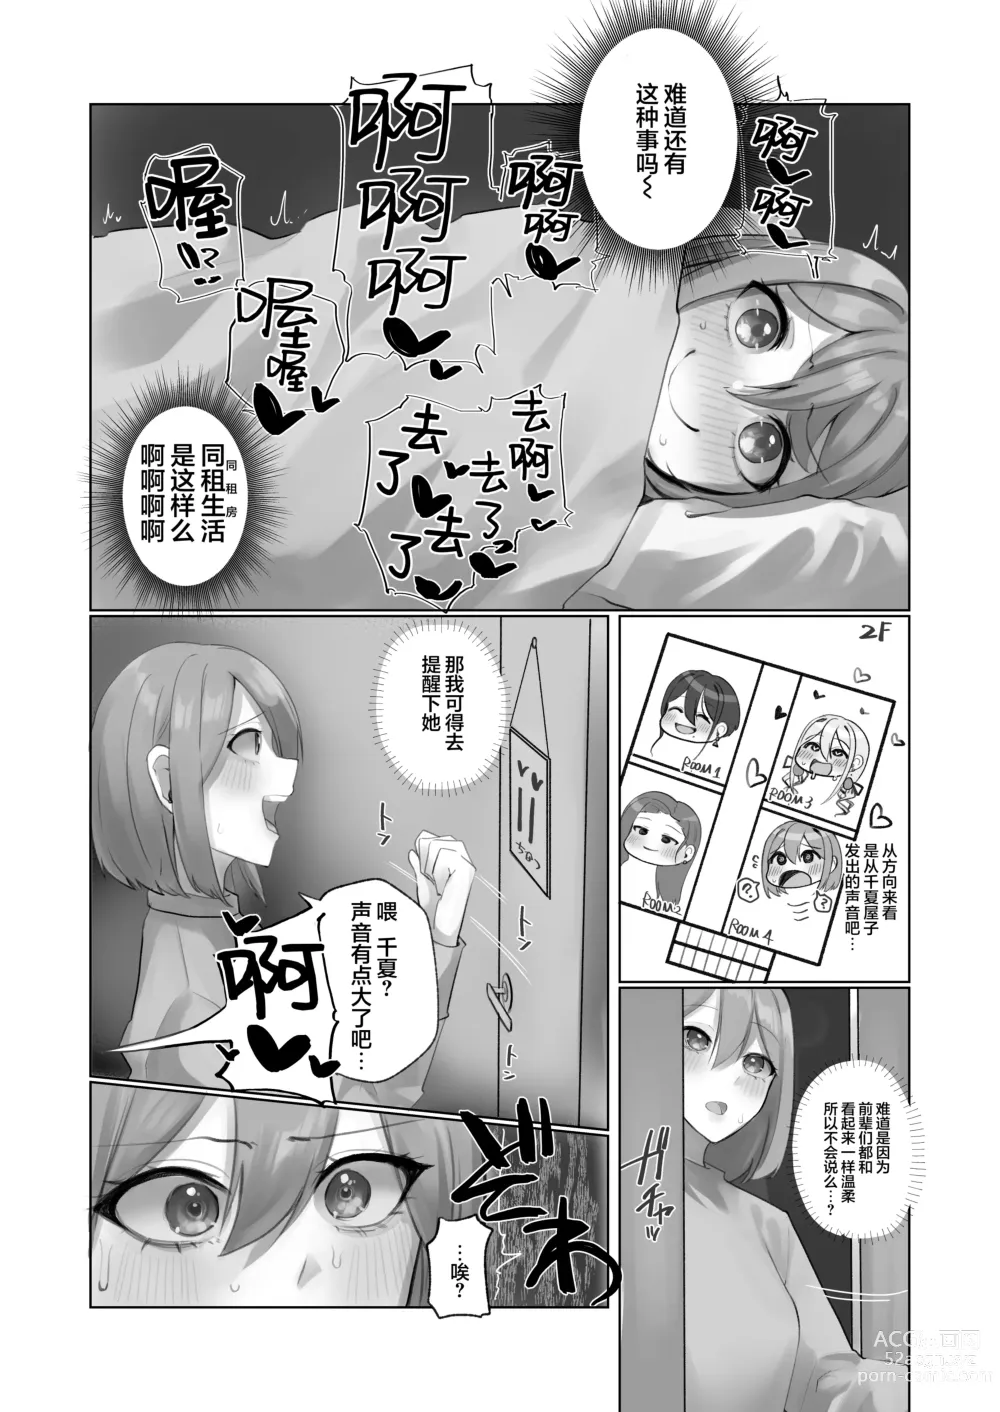 Page 5 of doujinshi Youkoso  Share House e